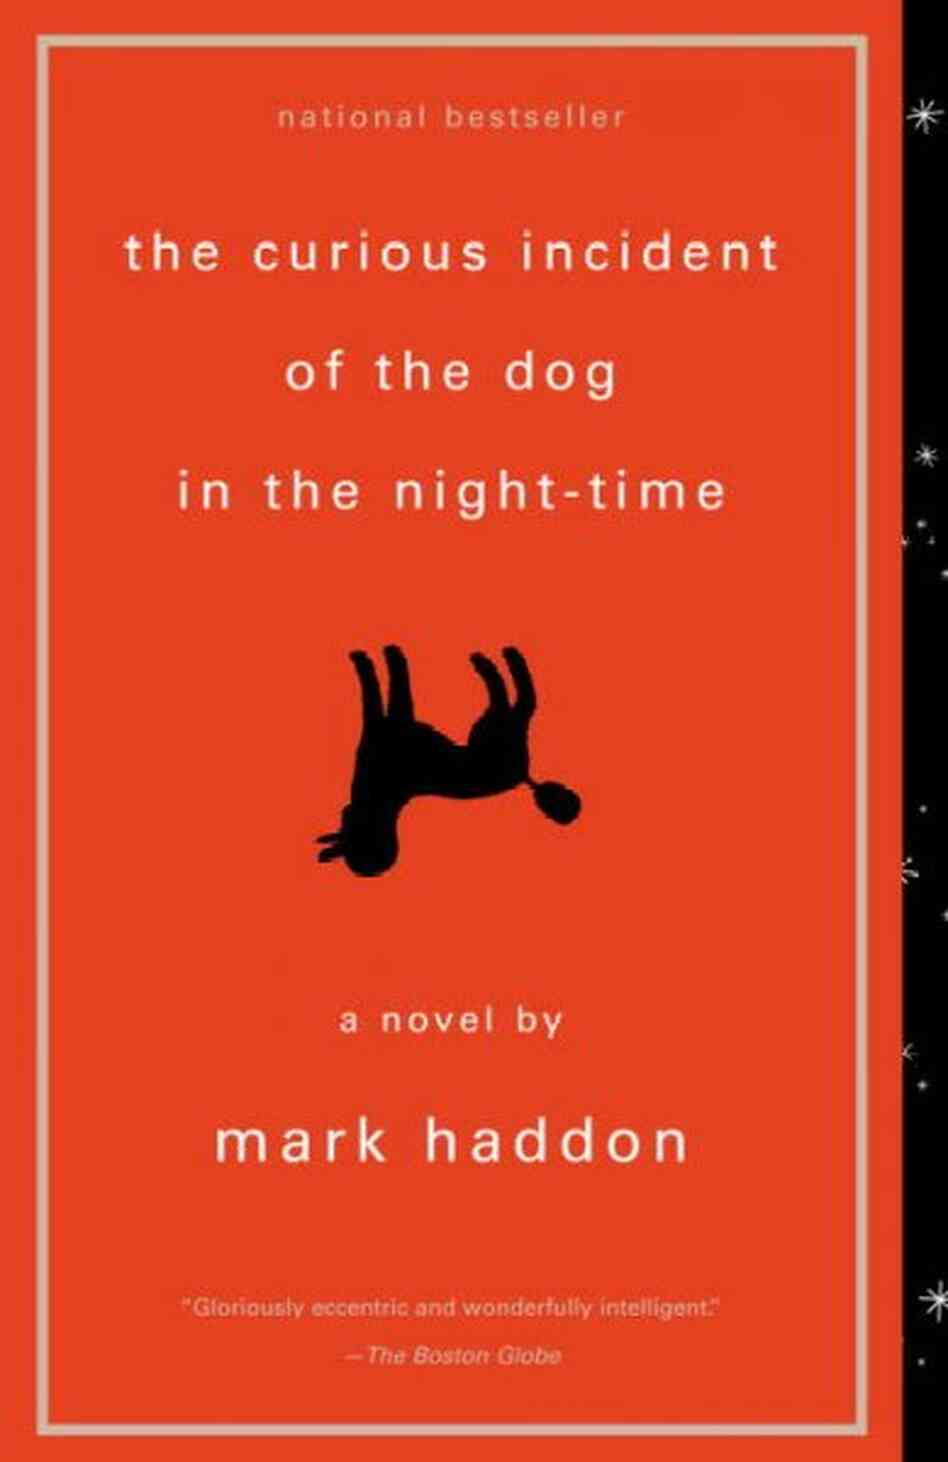 Mark Haddon: The Curious Incident of the Dog in the Night-time (Hardcover, 2002, RB Large Print)